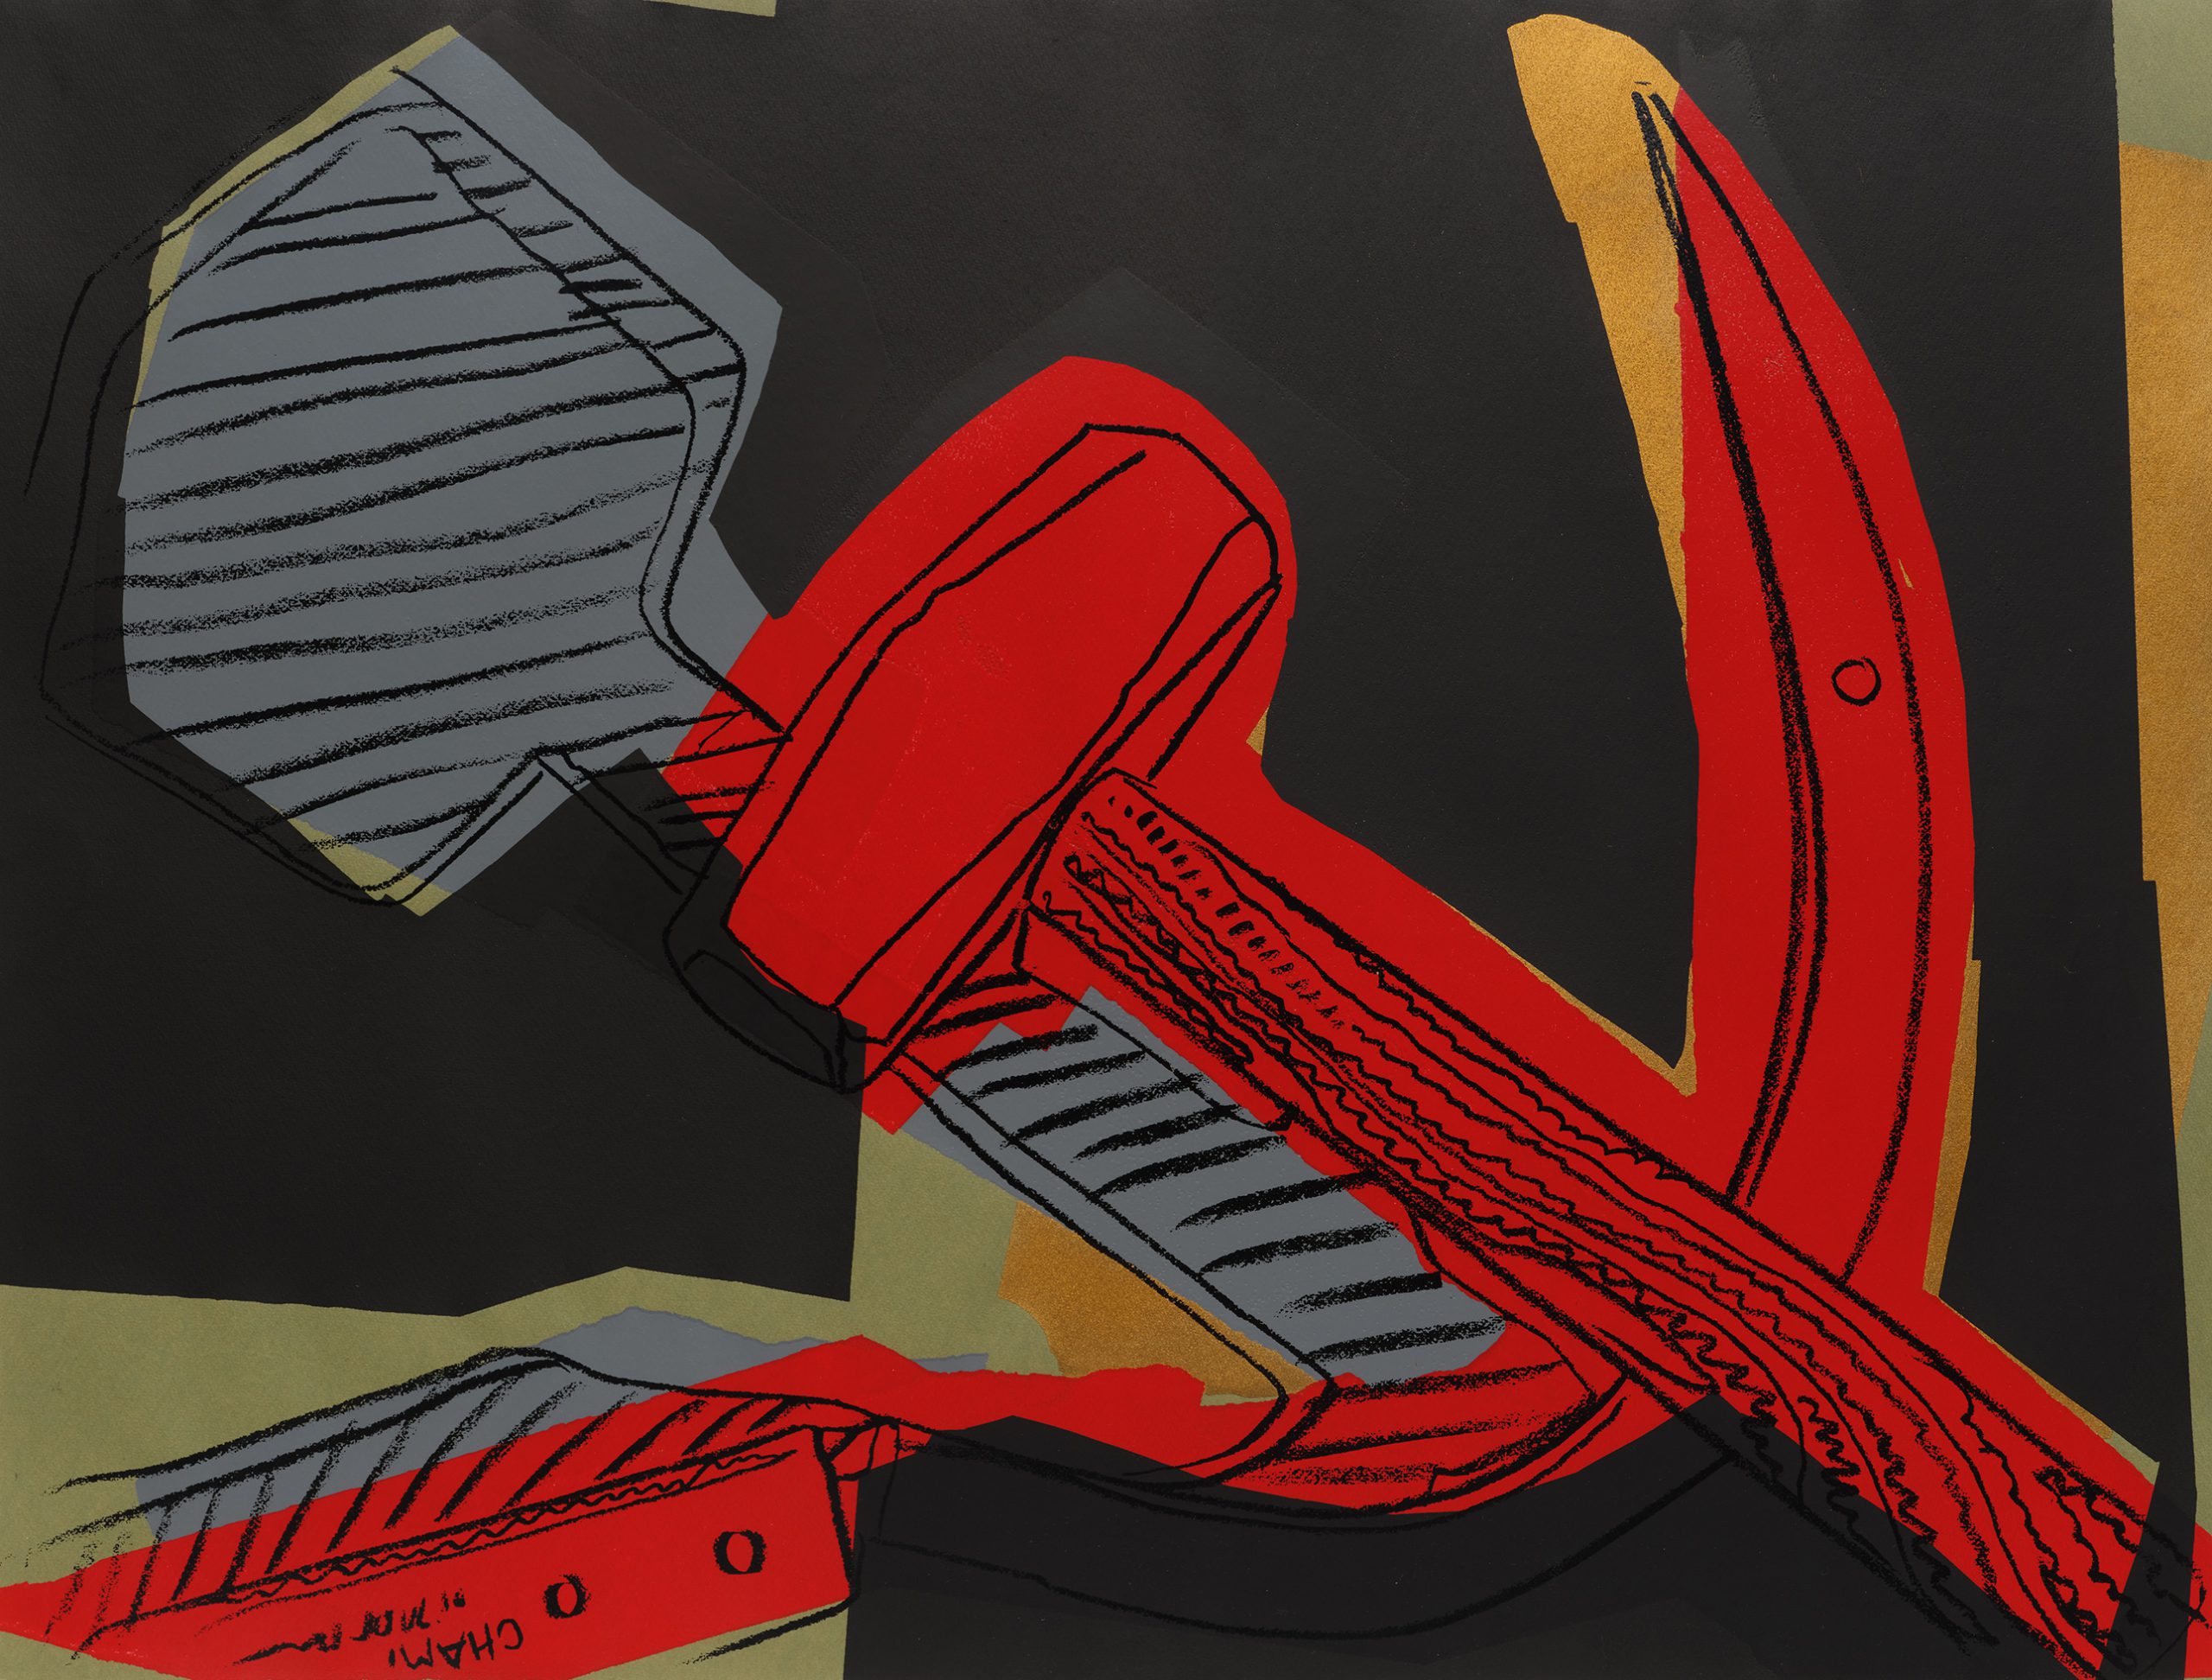 Hammer and Sickle by Andy Warhol